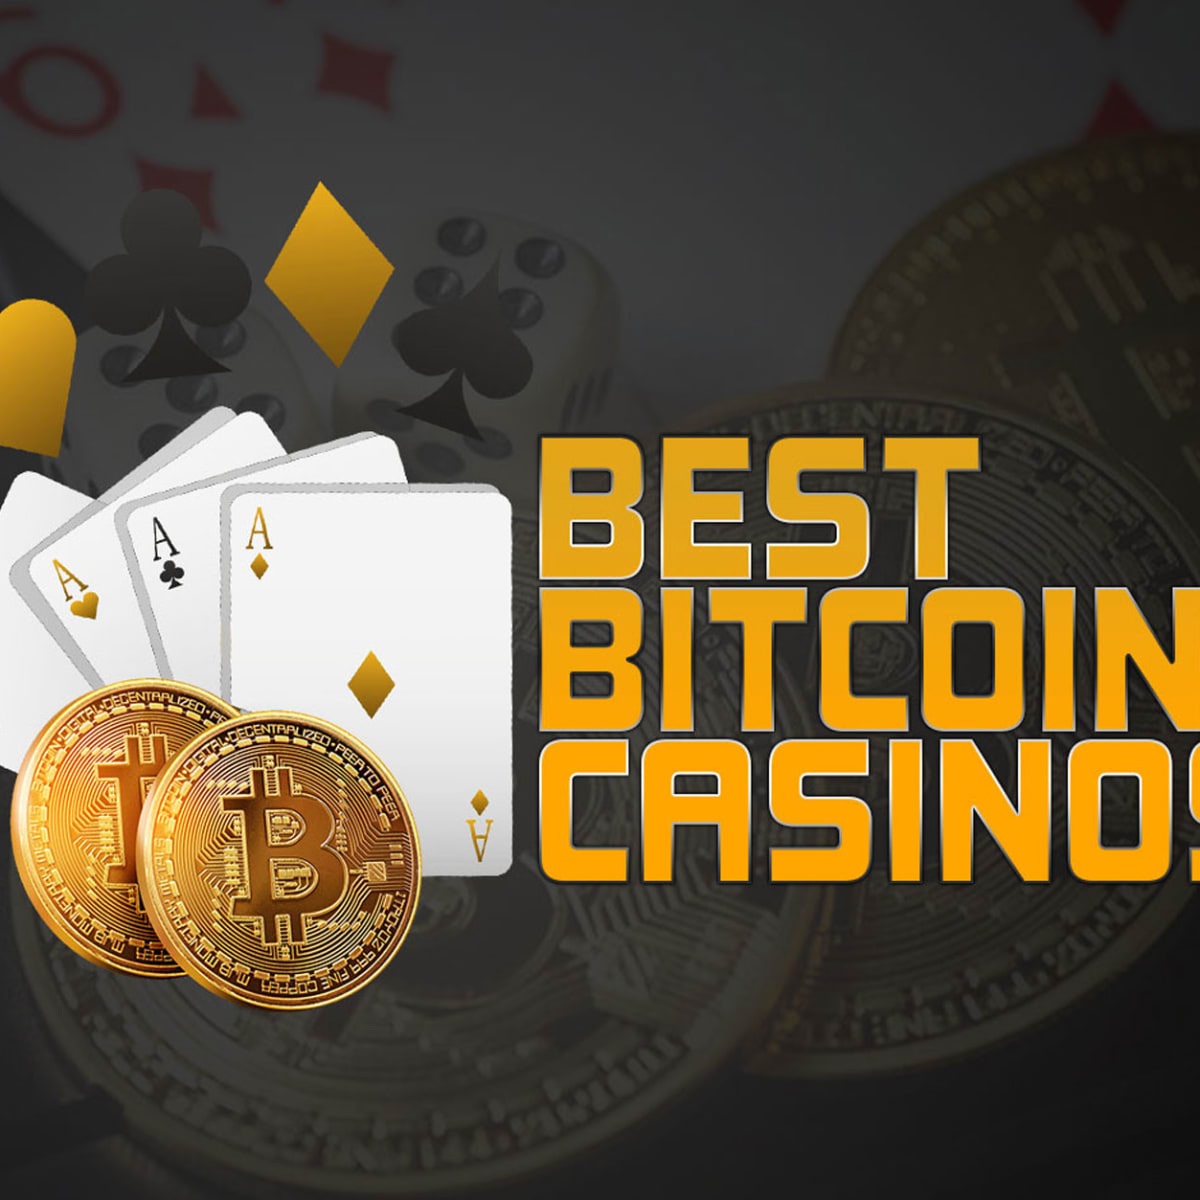 best bitcoin casinos? It's Easy If You Do It Smart